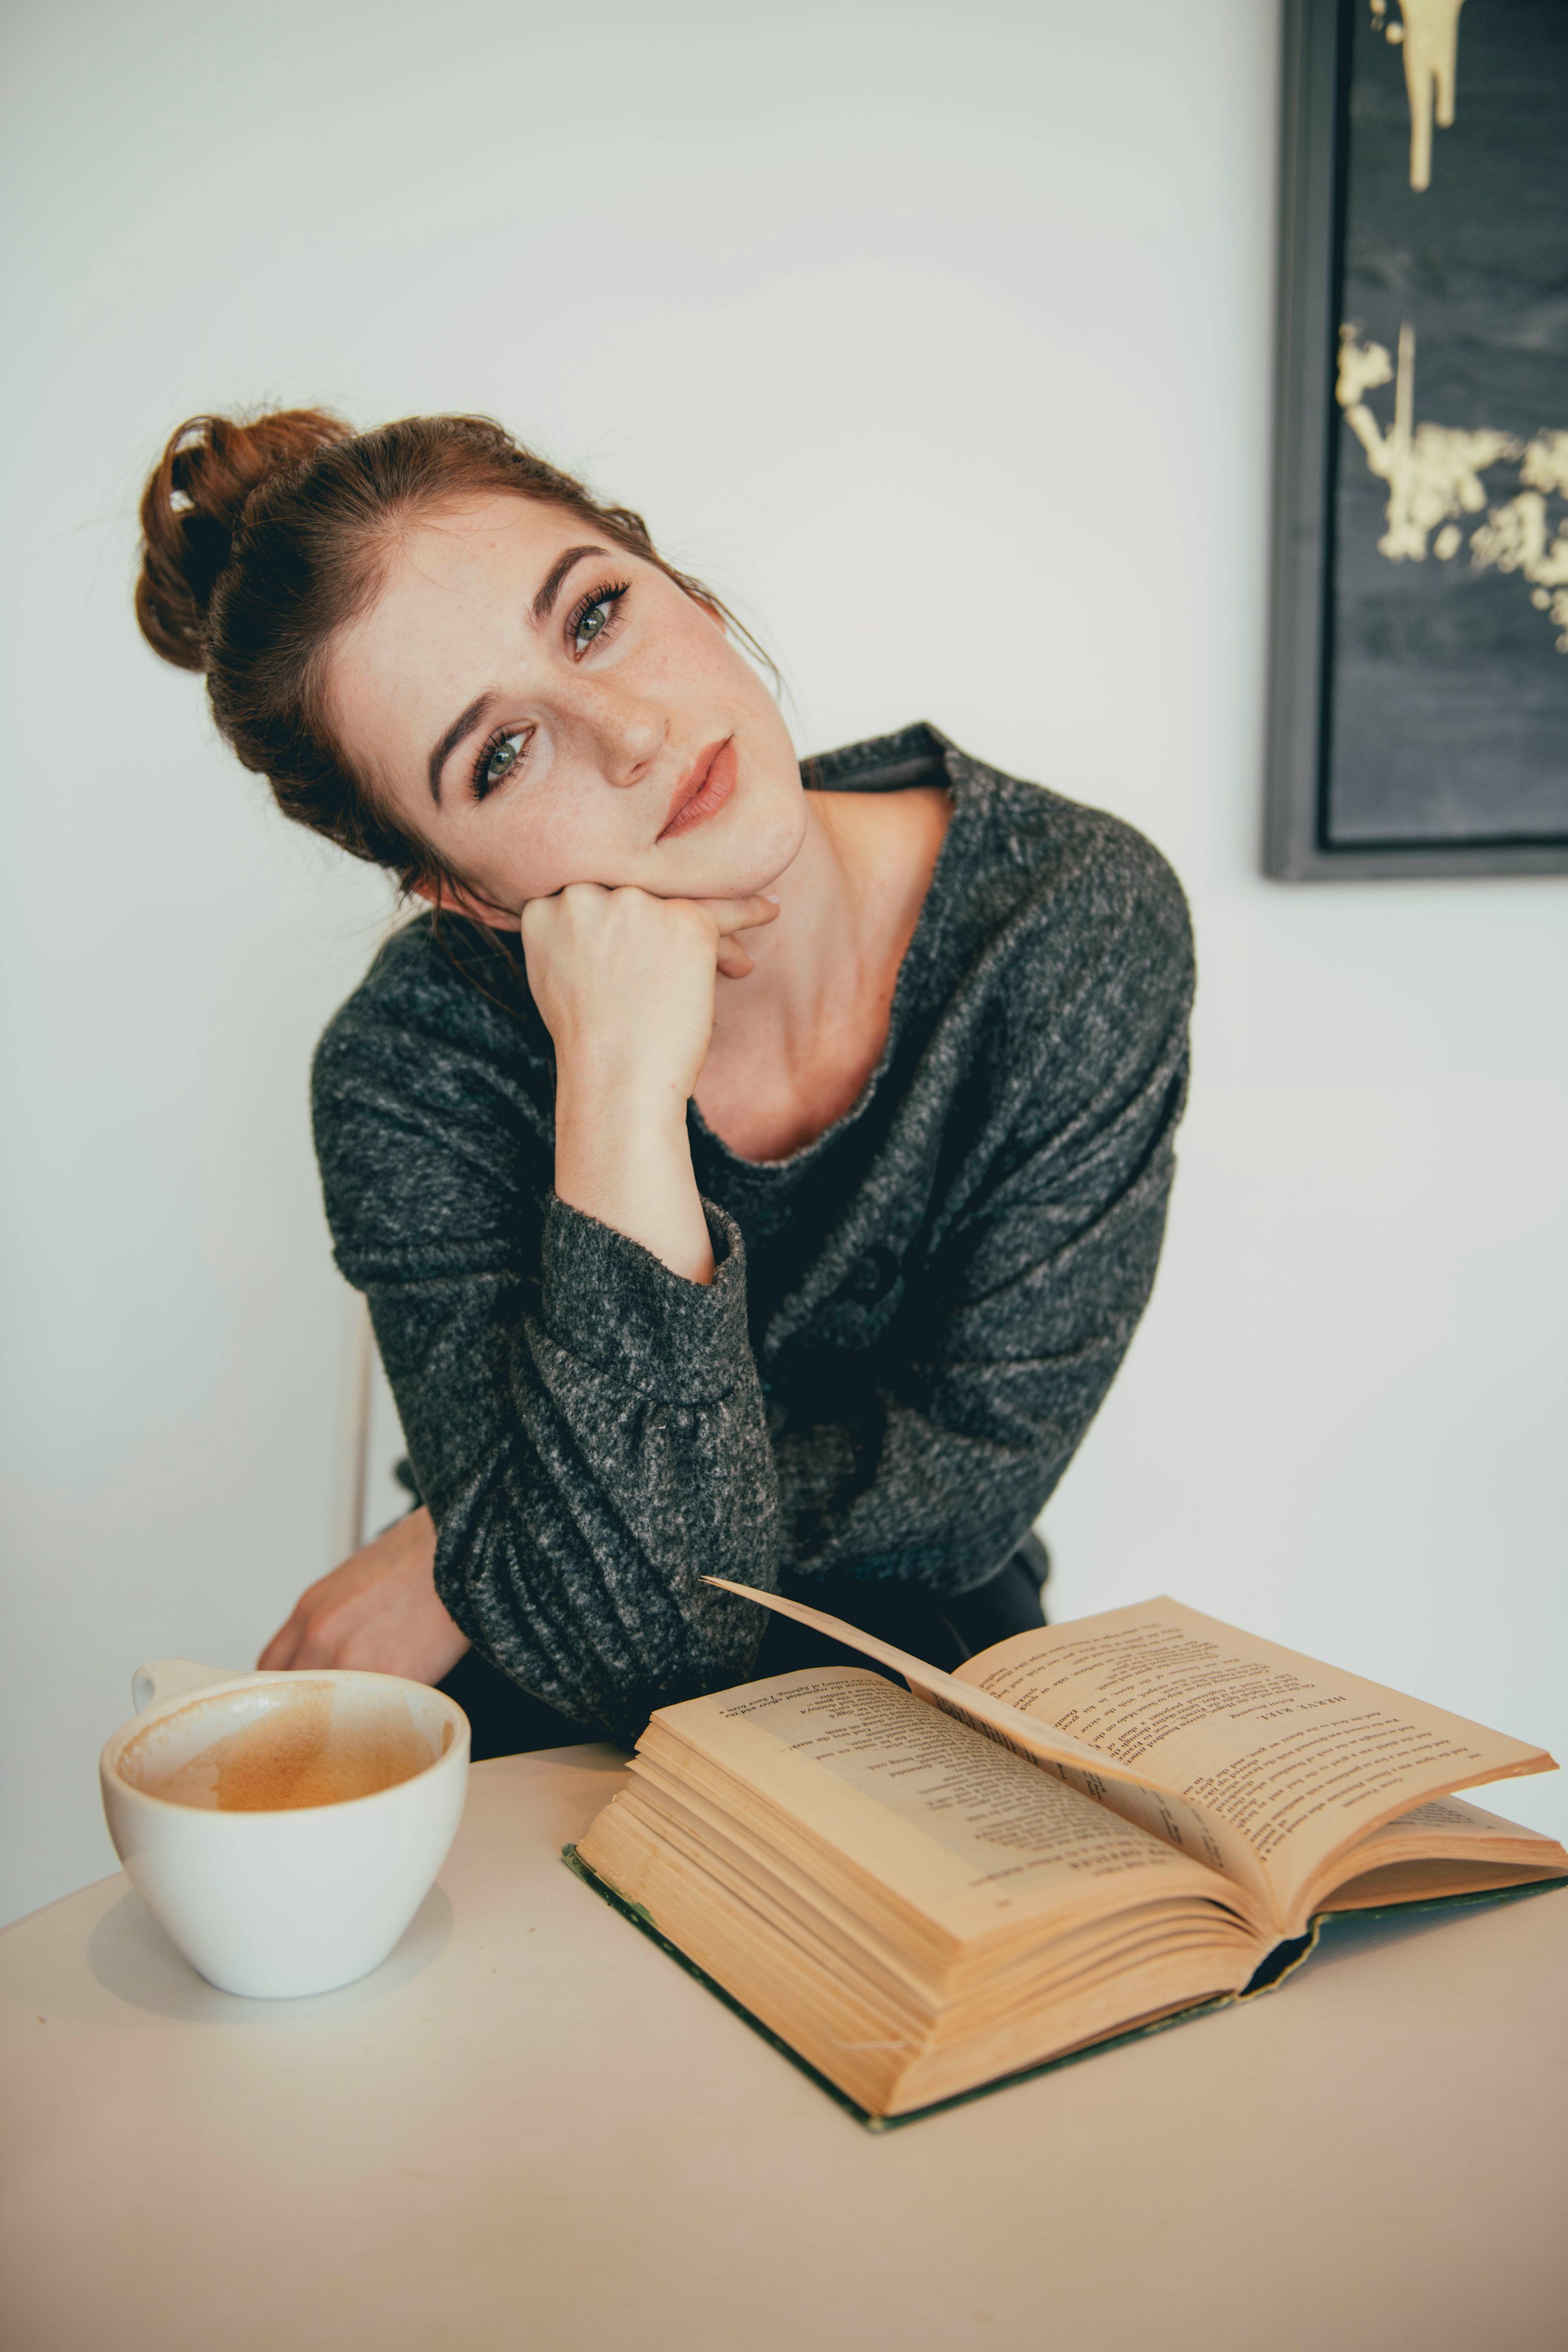 A woman sitting near a cup of coffee and an open book | Source: Unsplash